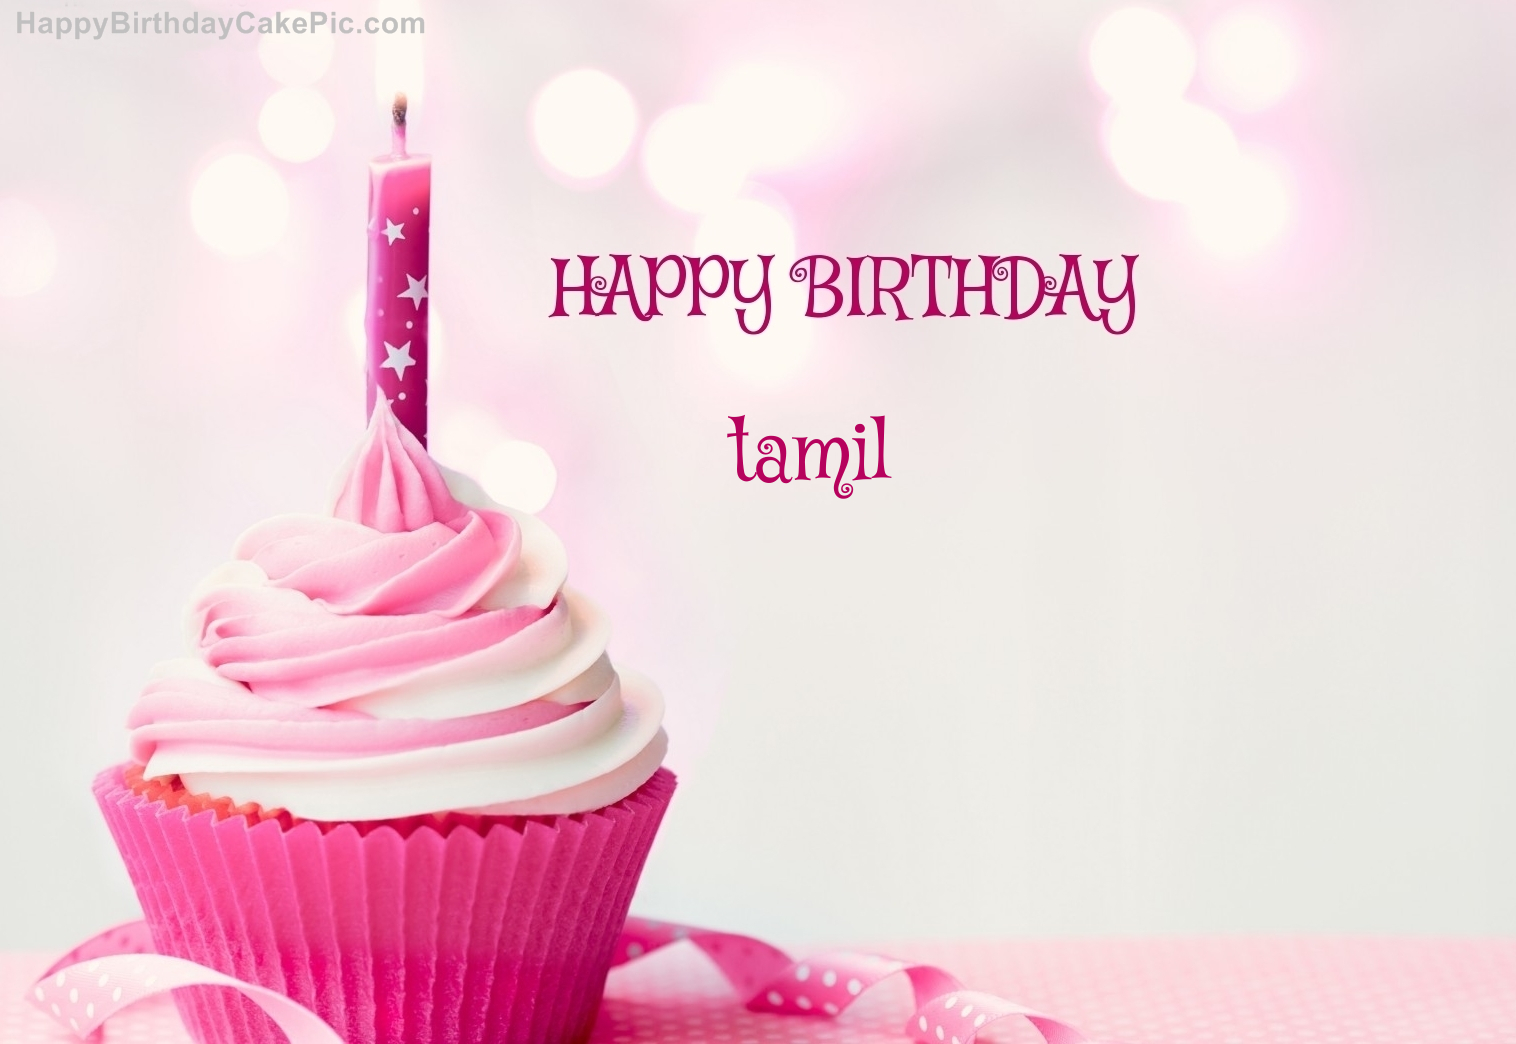 How to write happy birthday in tamil language - ghostwritingrates